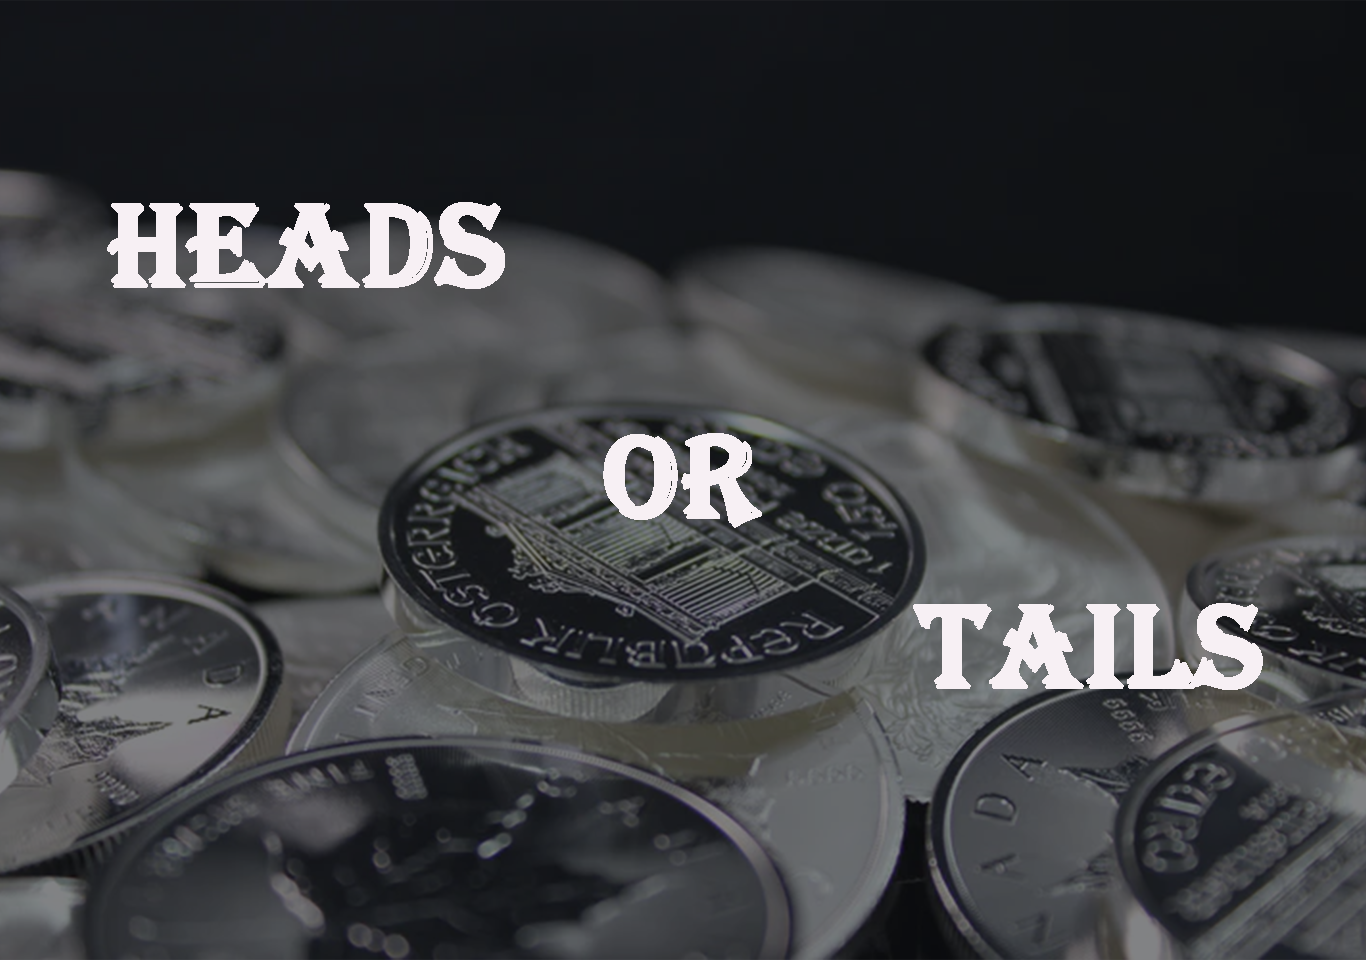 Heads or tails in python